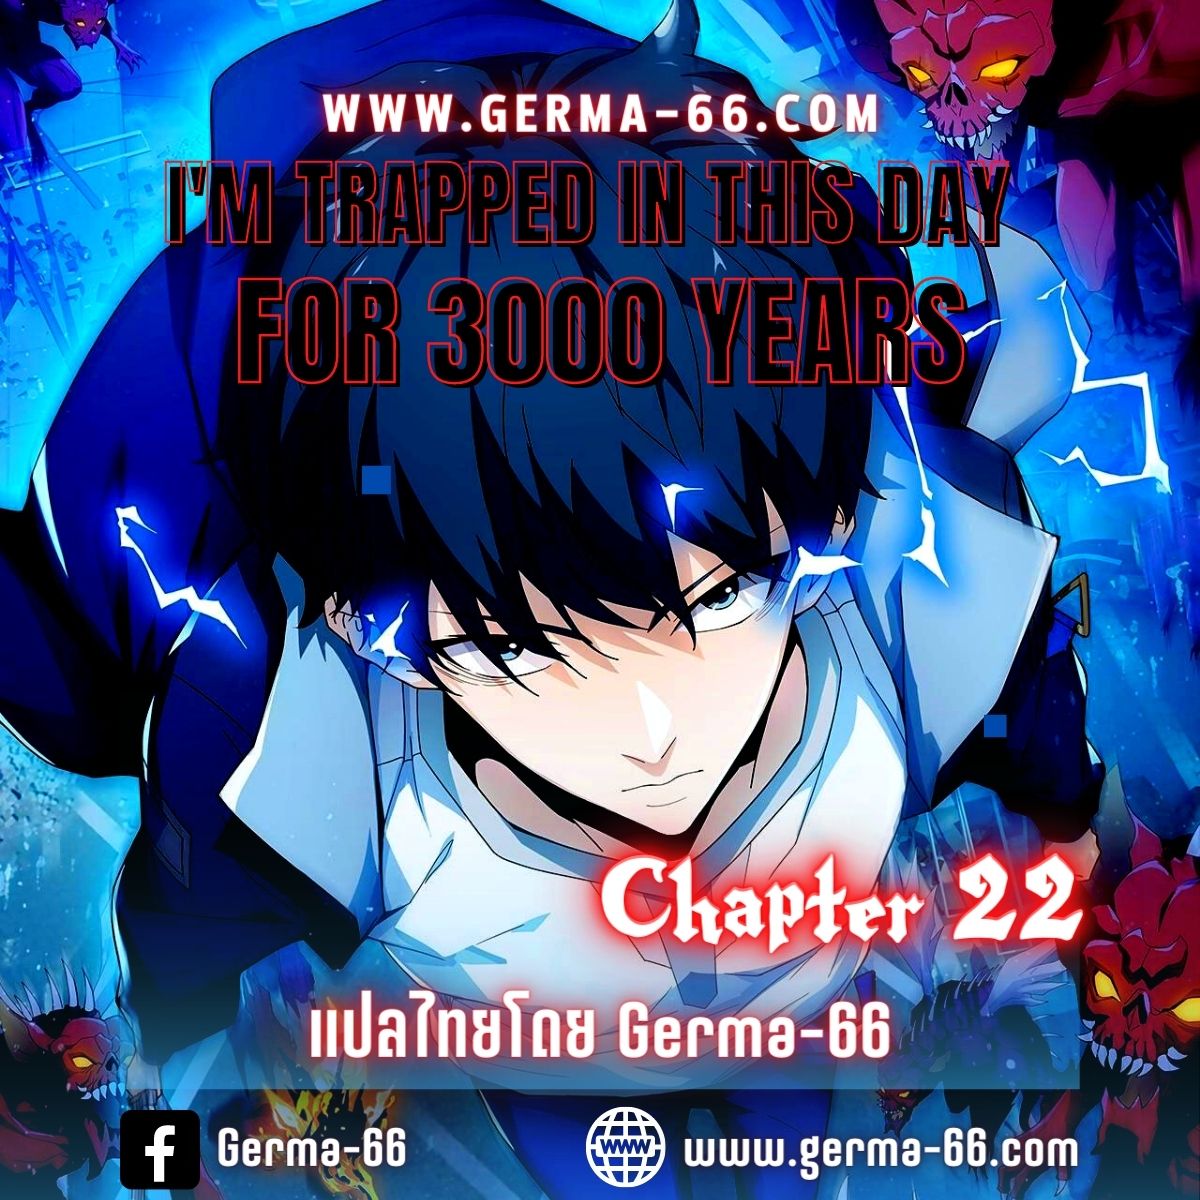 germa 66 trapped in this day for 3000 years 22.01